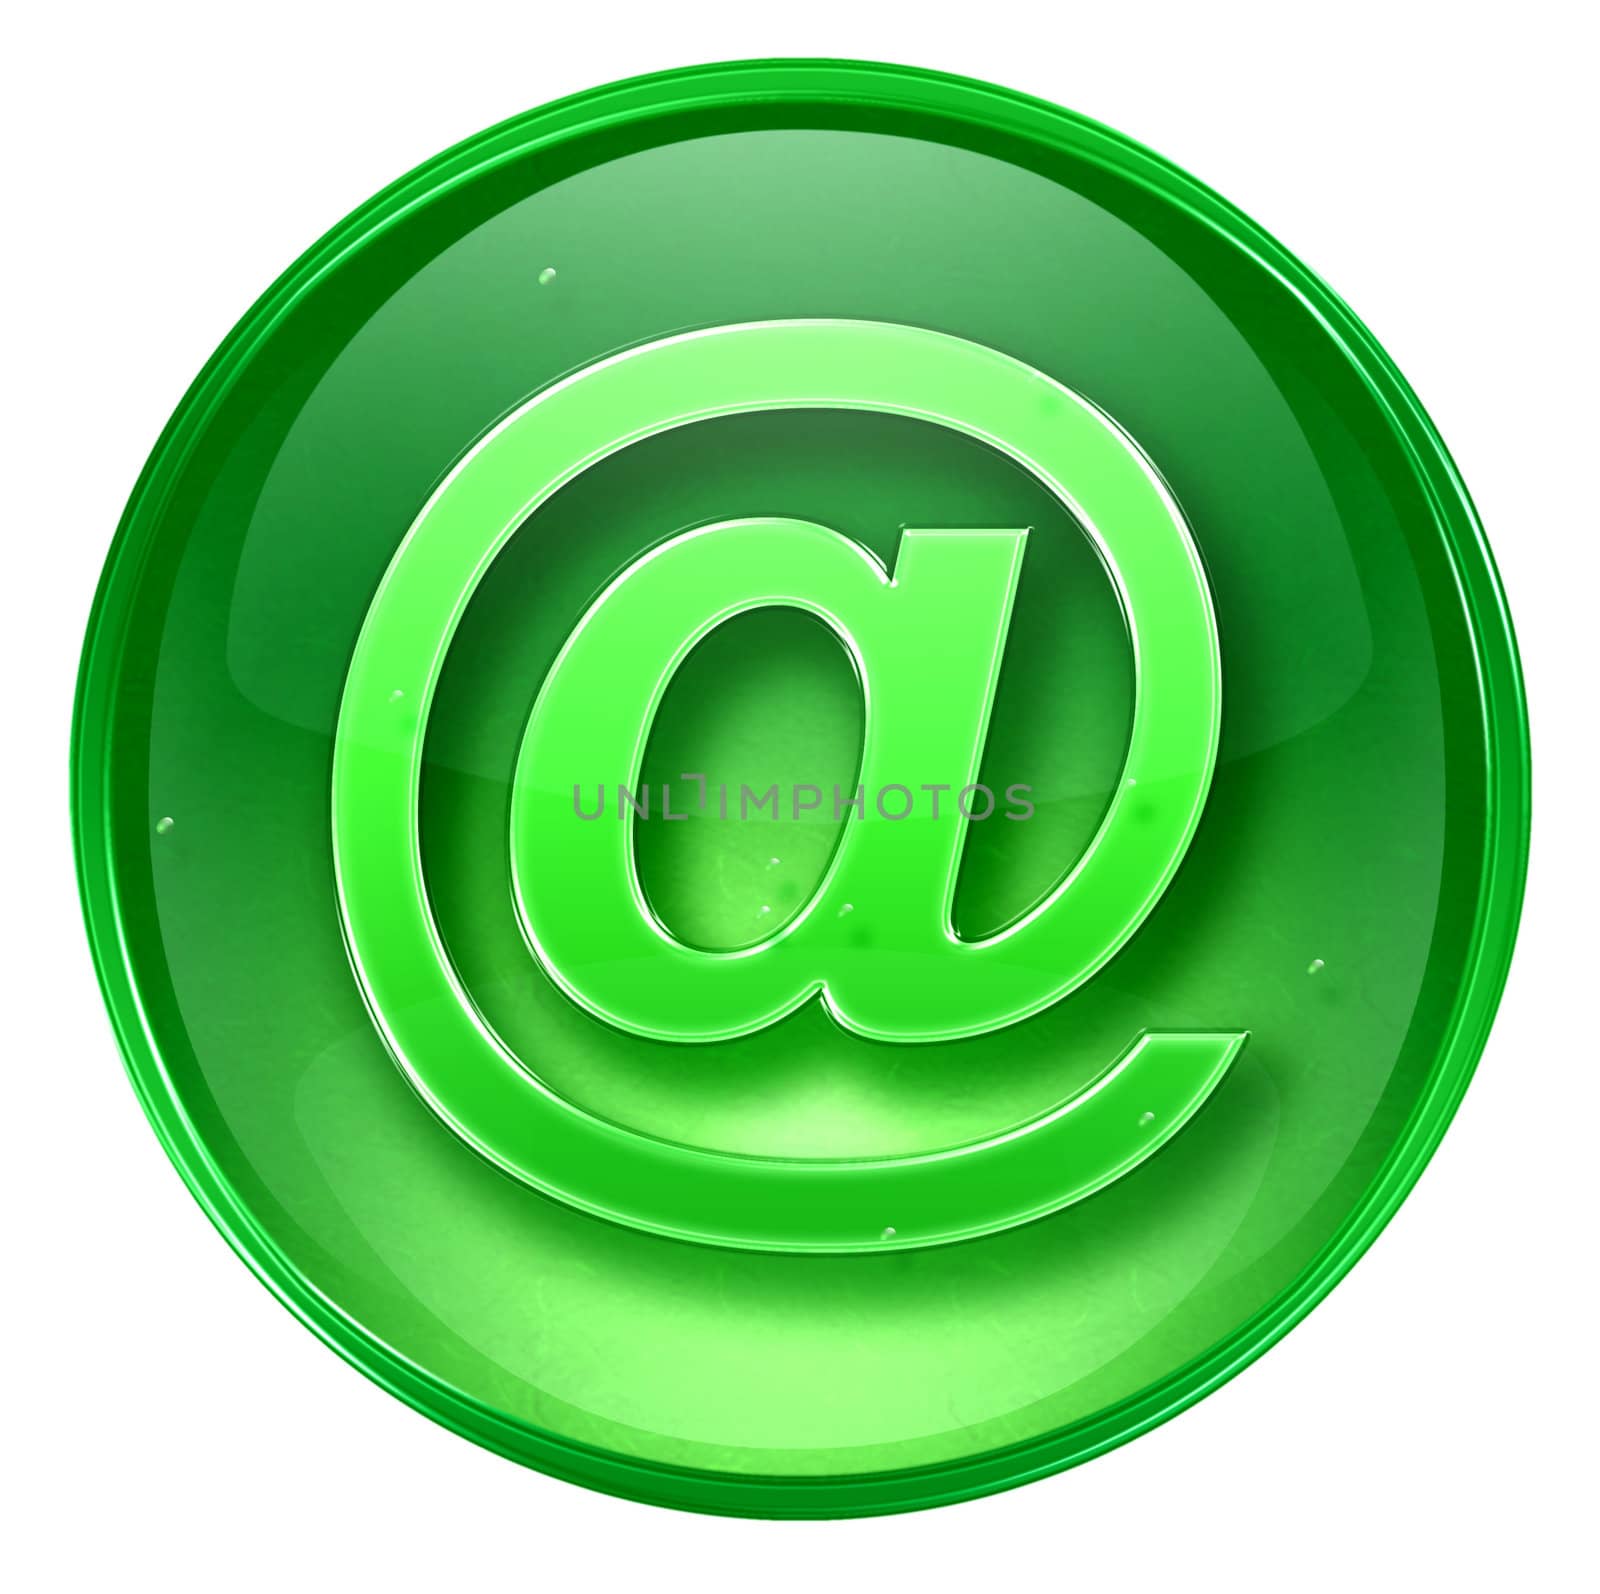 mail icon green, isolated on white background.  by zeffss